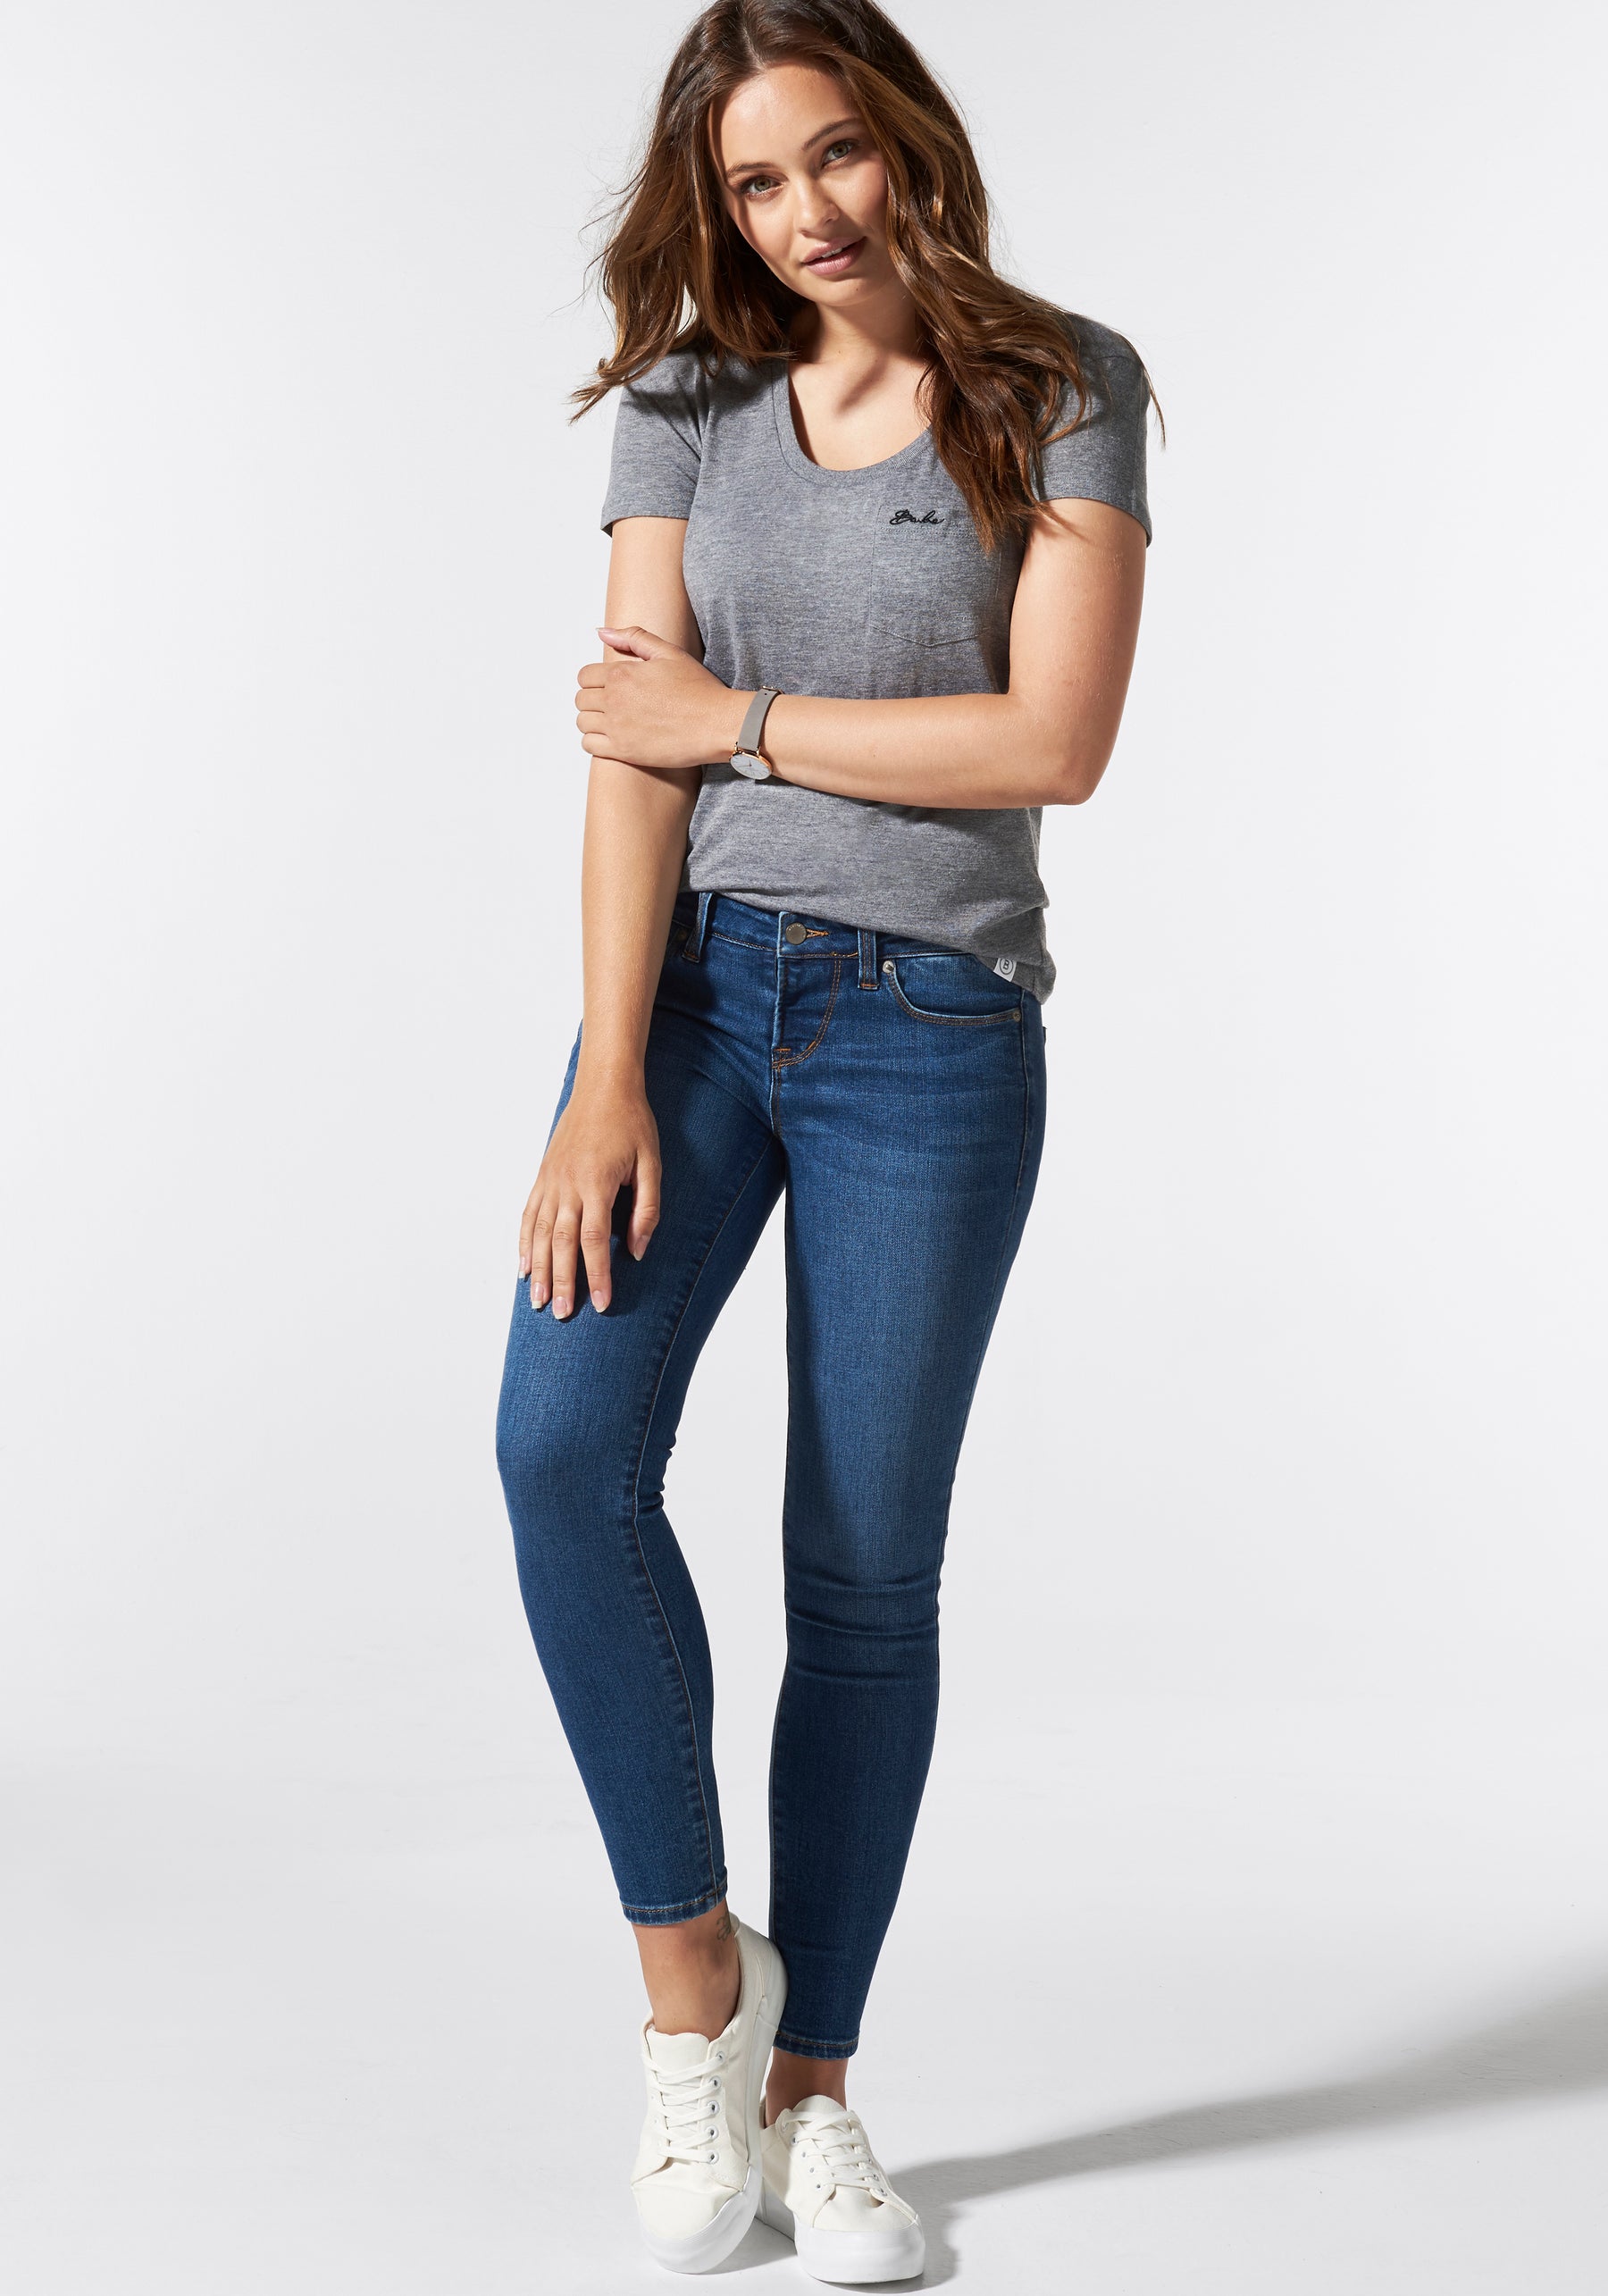 BLANQI Maternity Belly Support Skinny Jeans - Smoke Wash – Mums